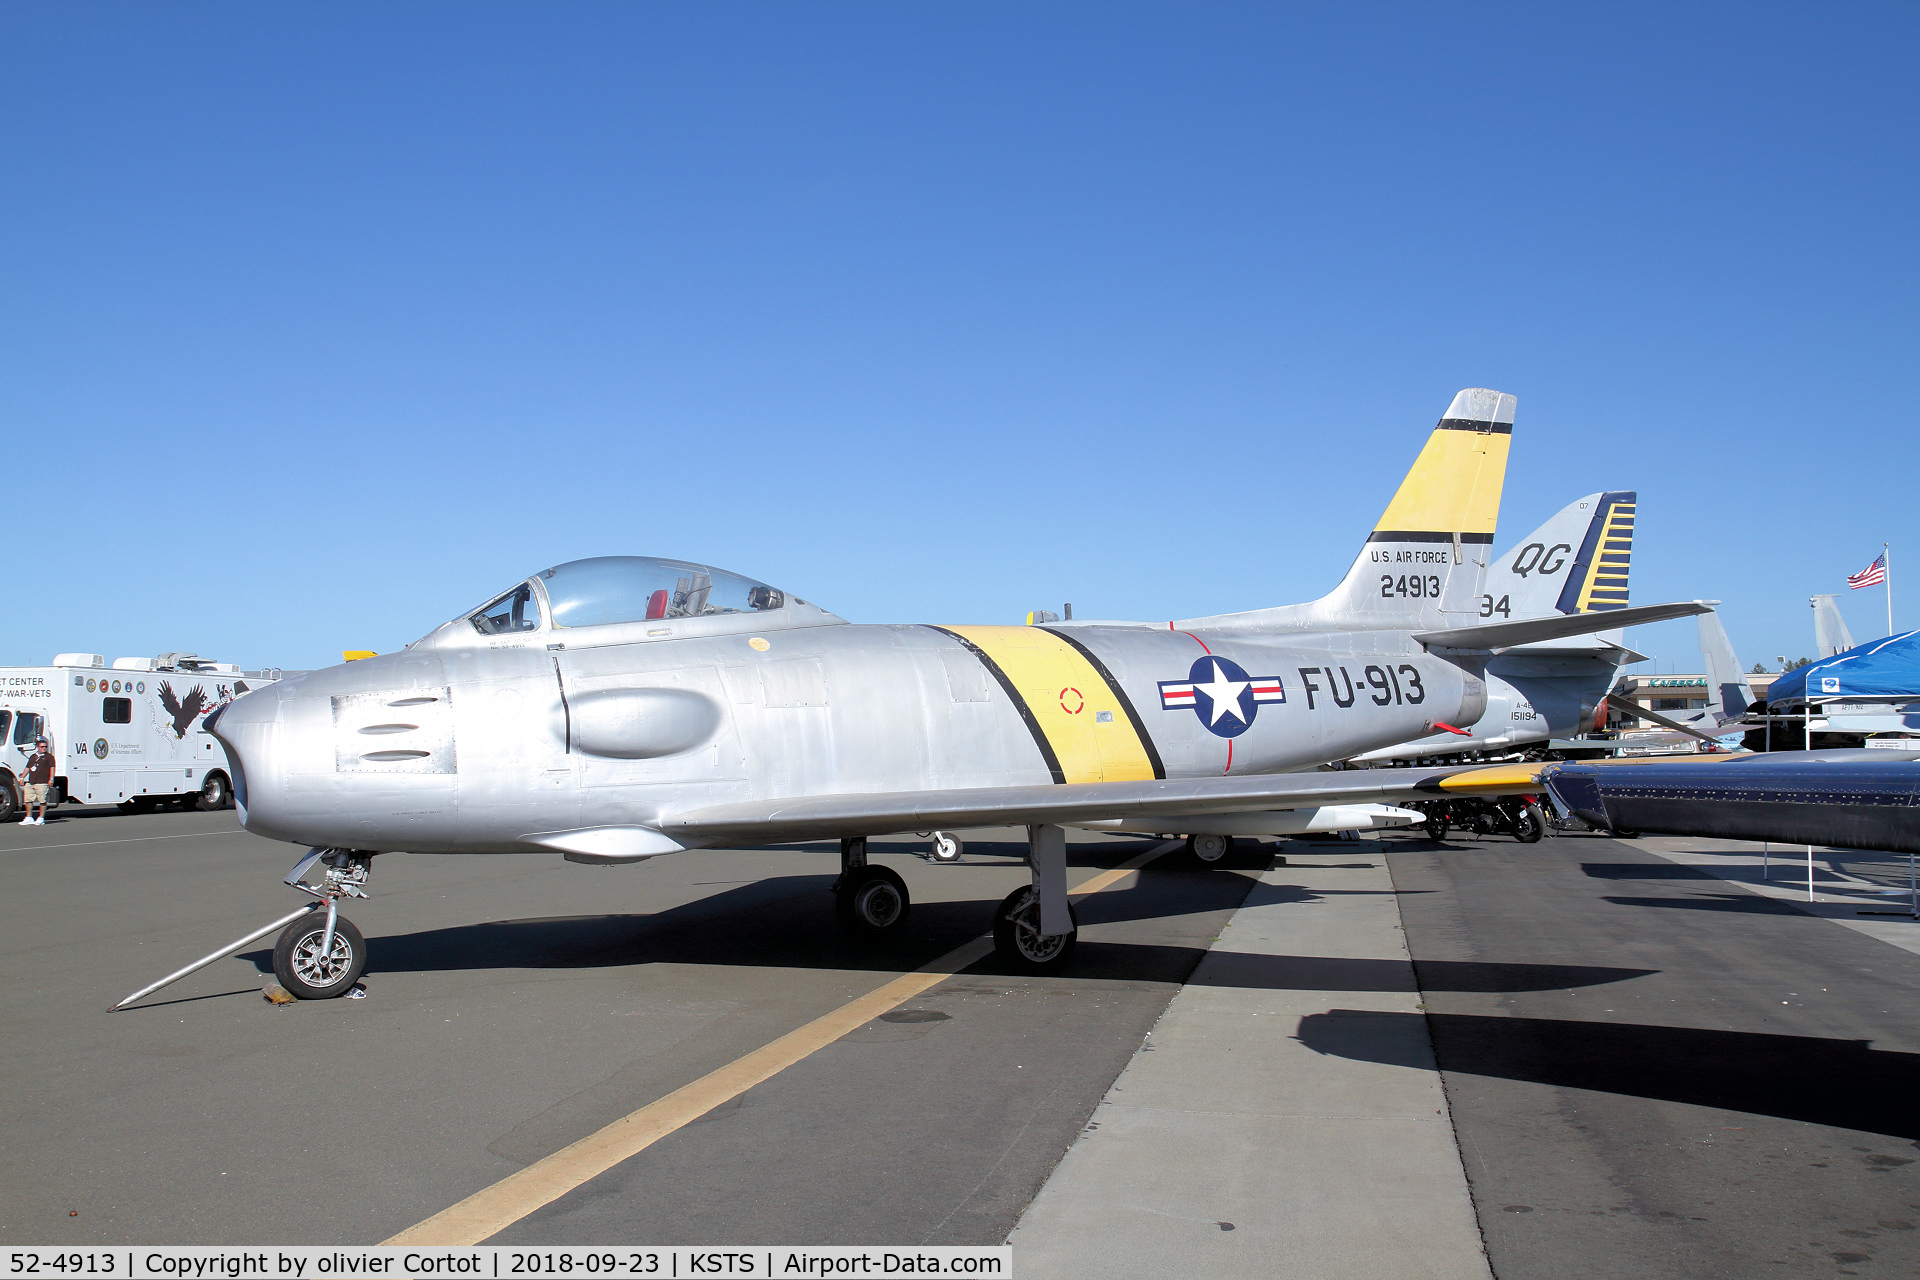 52-4913, 1952 North American RF-86F Sabre C/N 191-609, brought to the Santa Rosa airshow by the aircraft museum